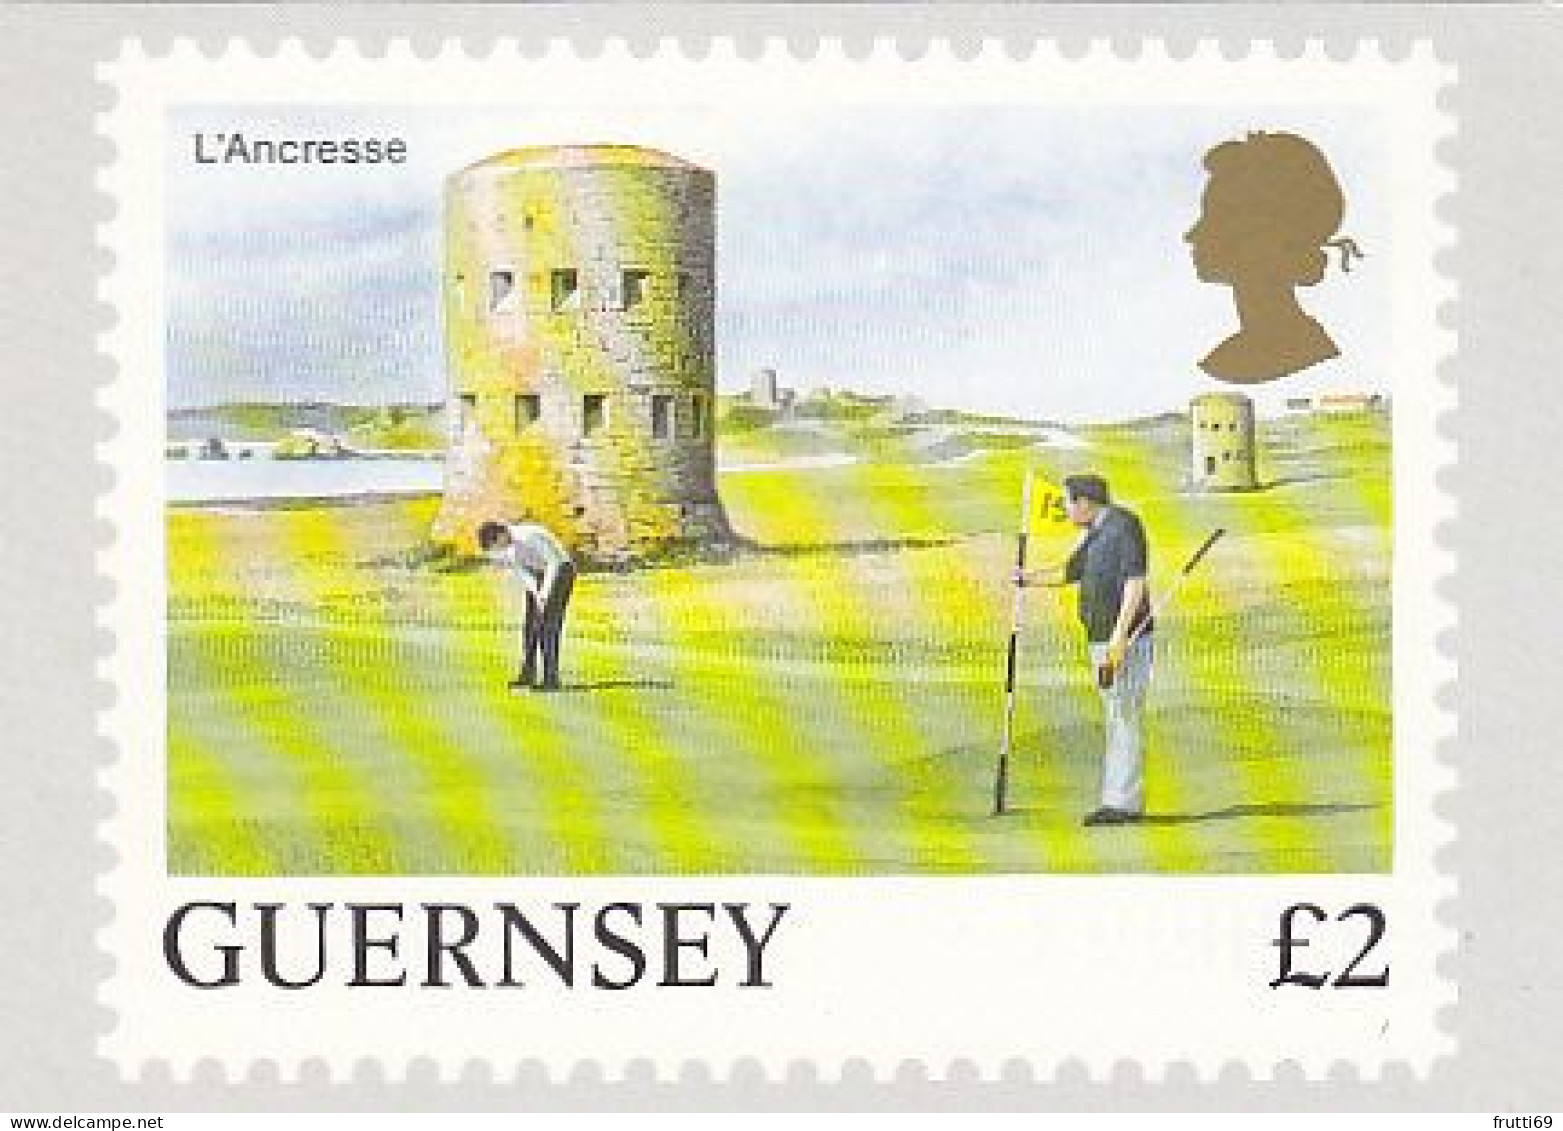 AK 175811 STAMP / BRIEFMARKE - Guernsey - L'Ancresse  - ONLY PICTURE NO STAMP - Timbres (représentations)